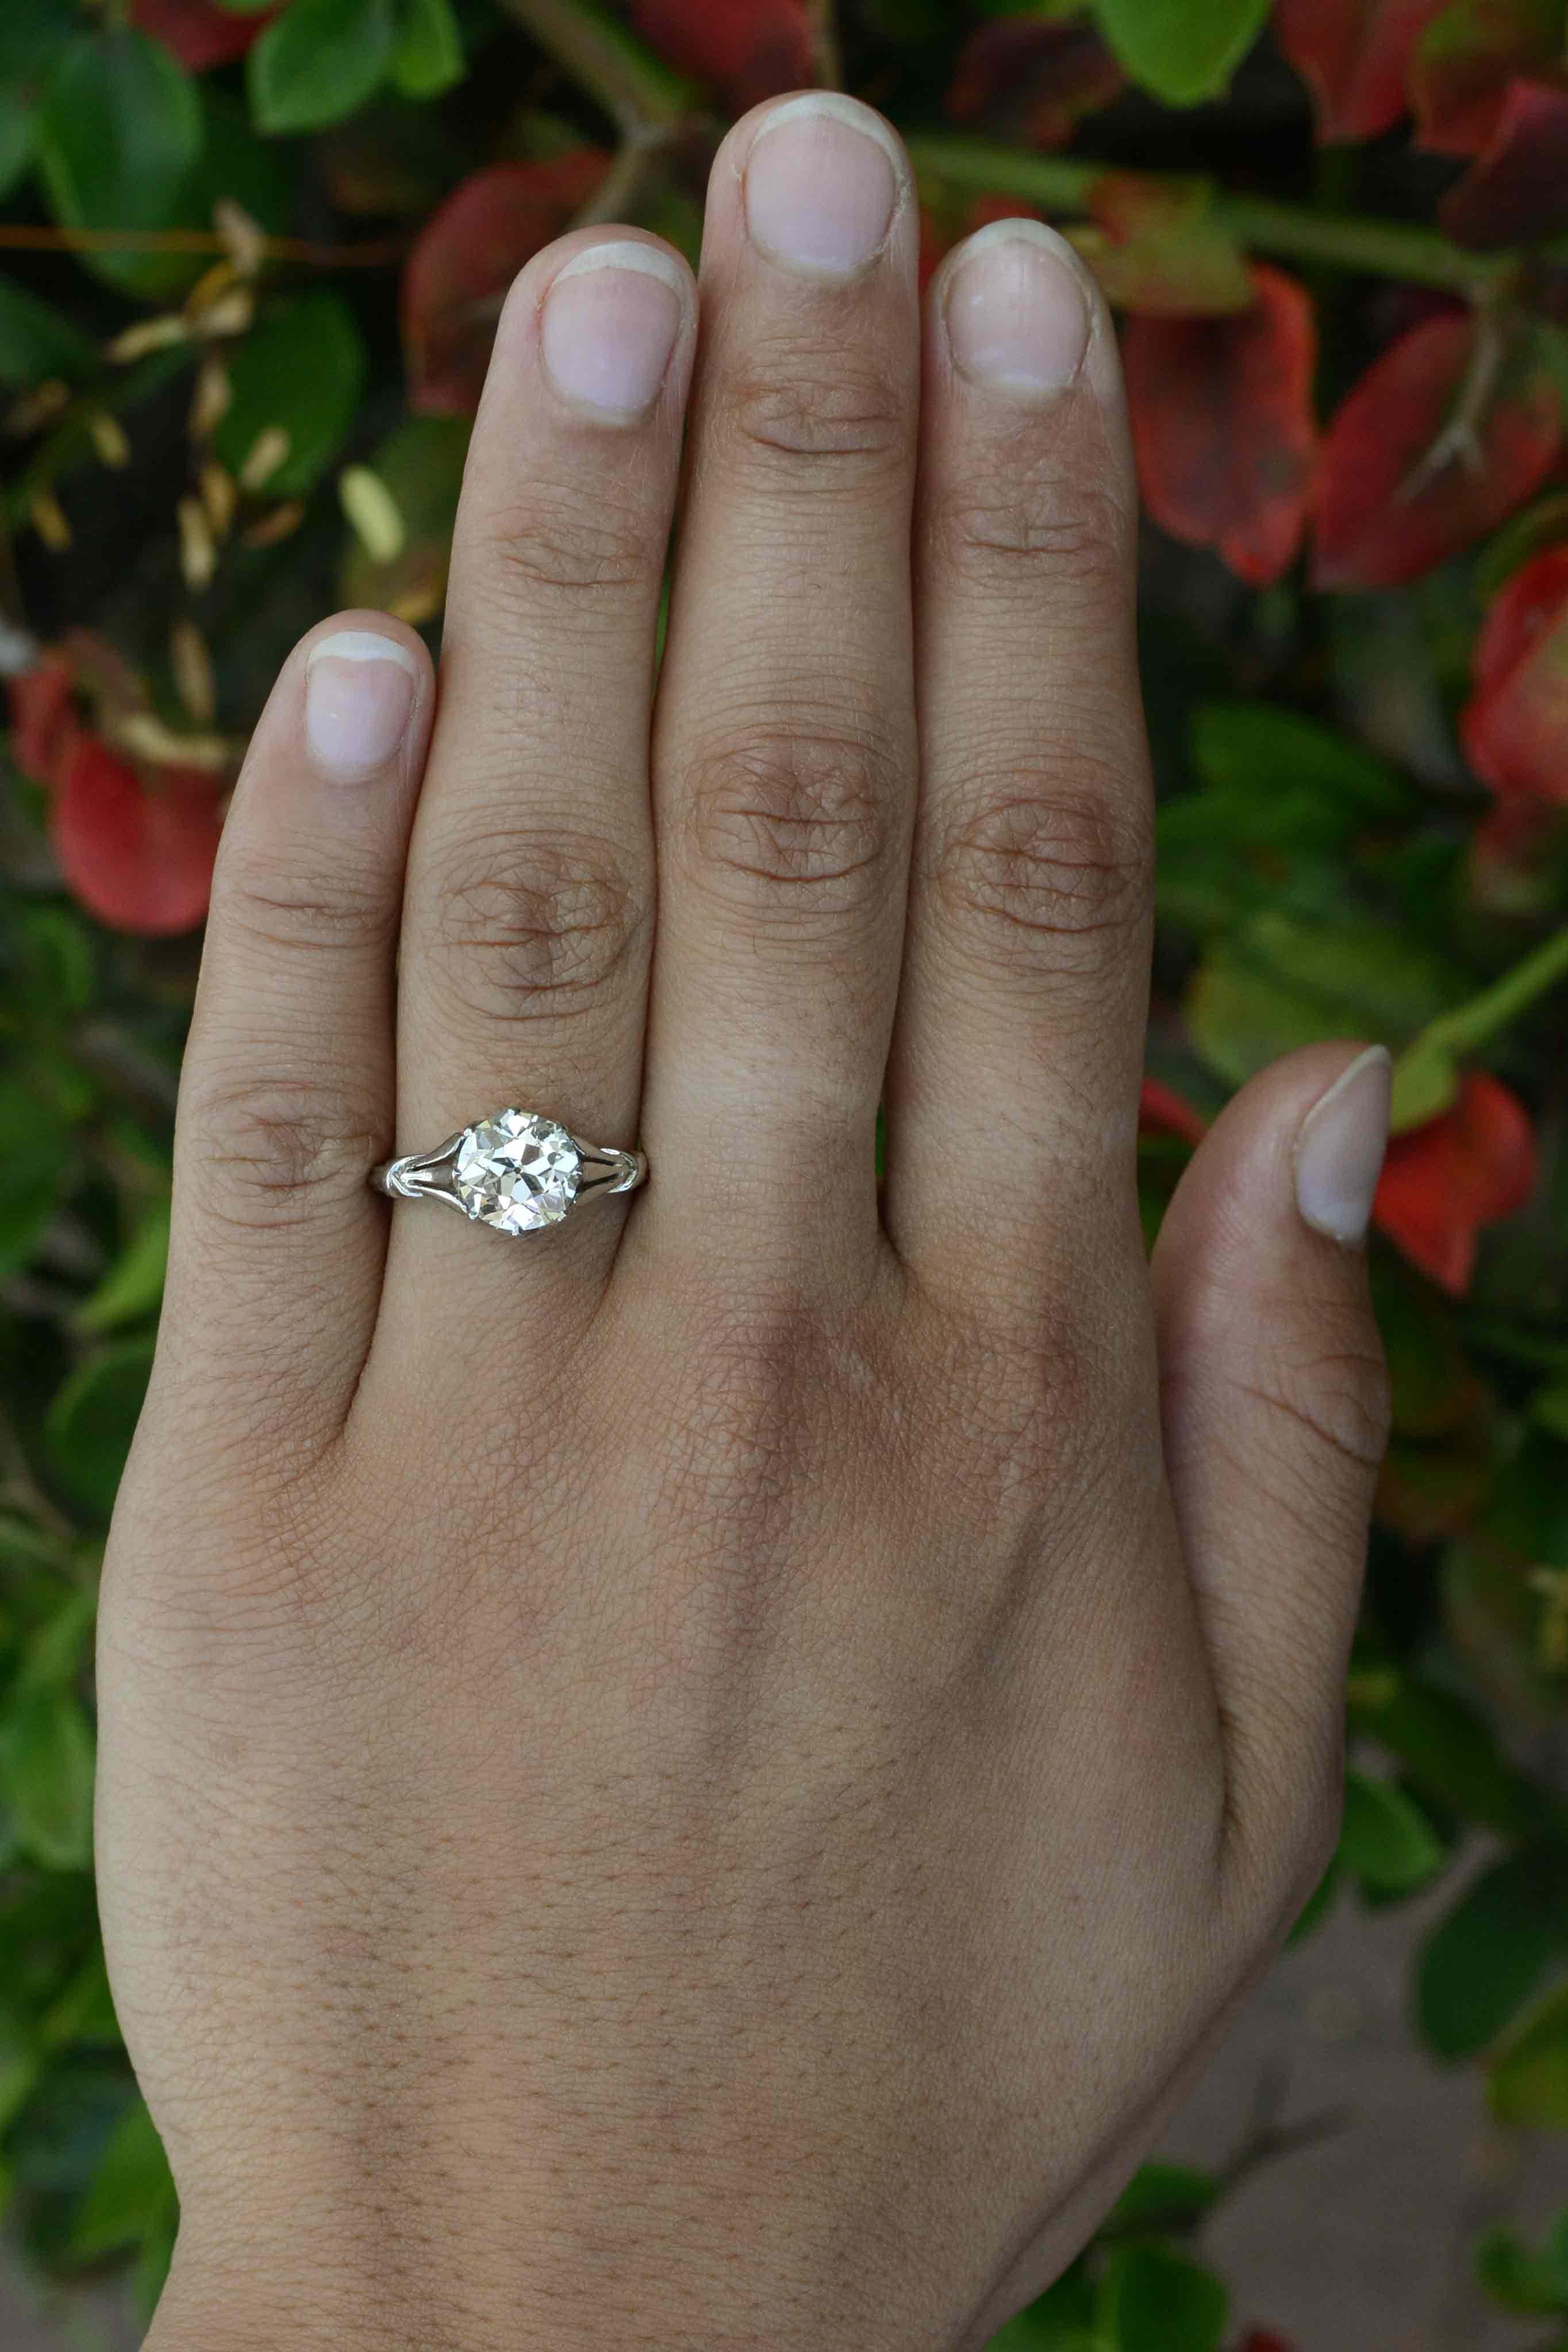 I like big rocks & cannot lie! Centered by a stunning, chunky old European cut diamond of 2.29 carat. this antique Edwardian engagement ring is a classic, vintage solitaire. The sparkle of these old world 